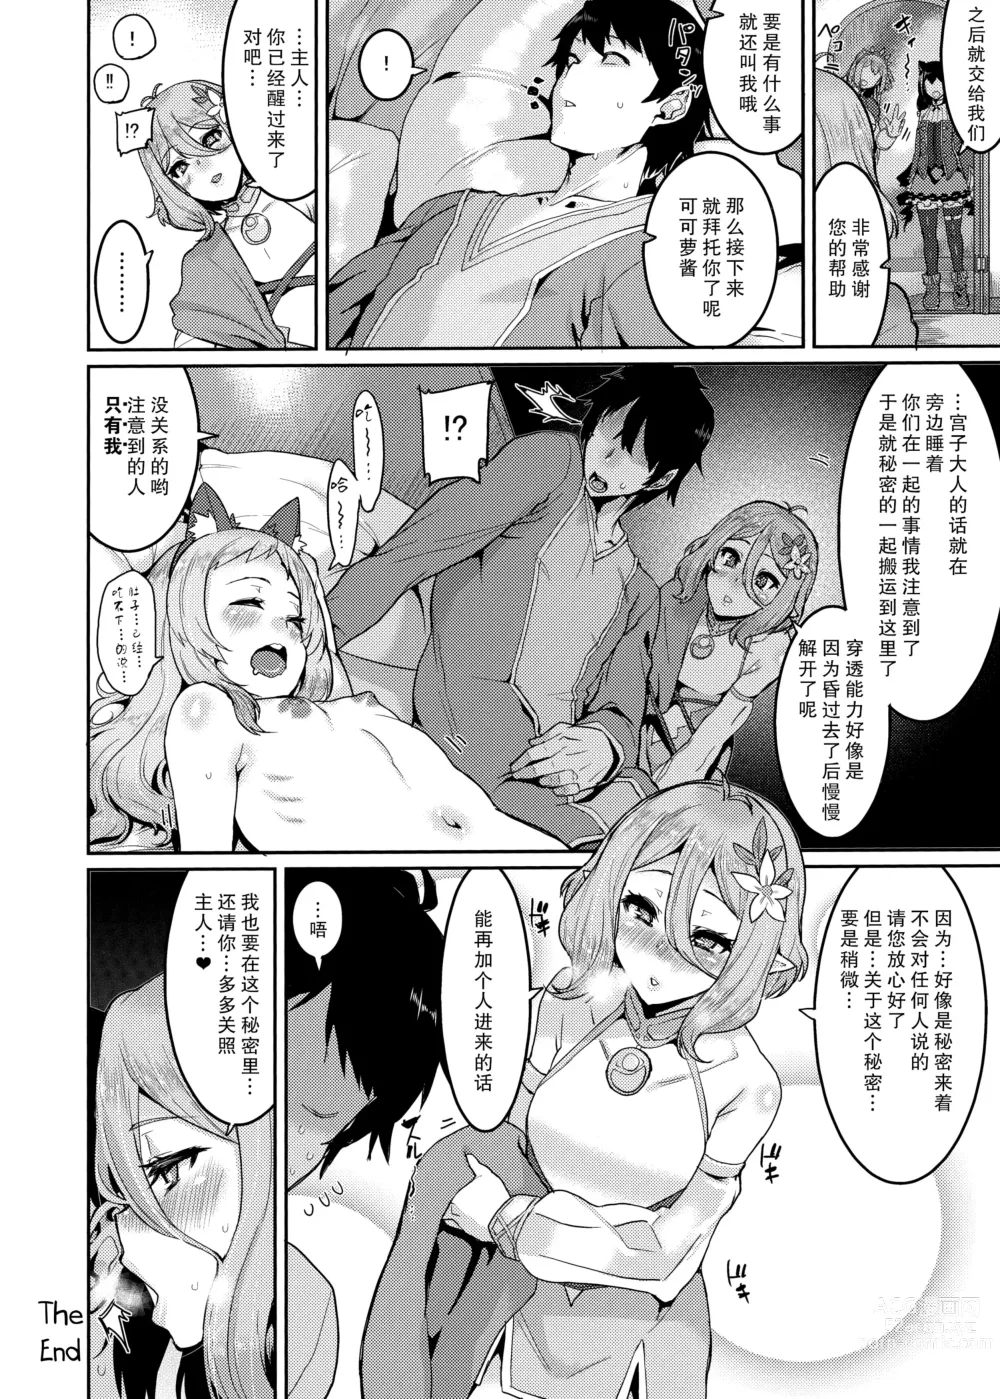 Page 24 of doujinshi Pudding Switch (decensored)